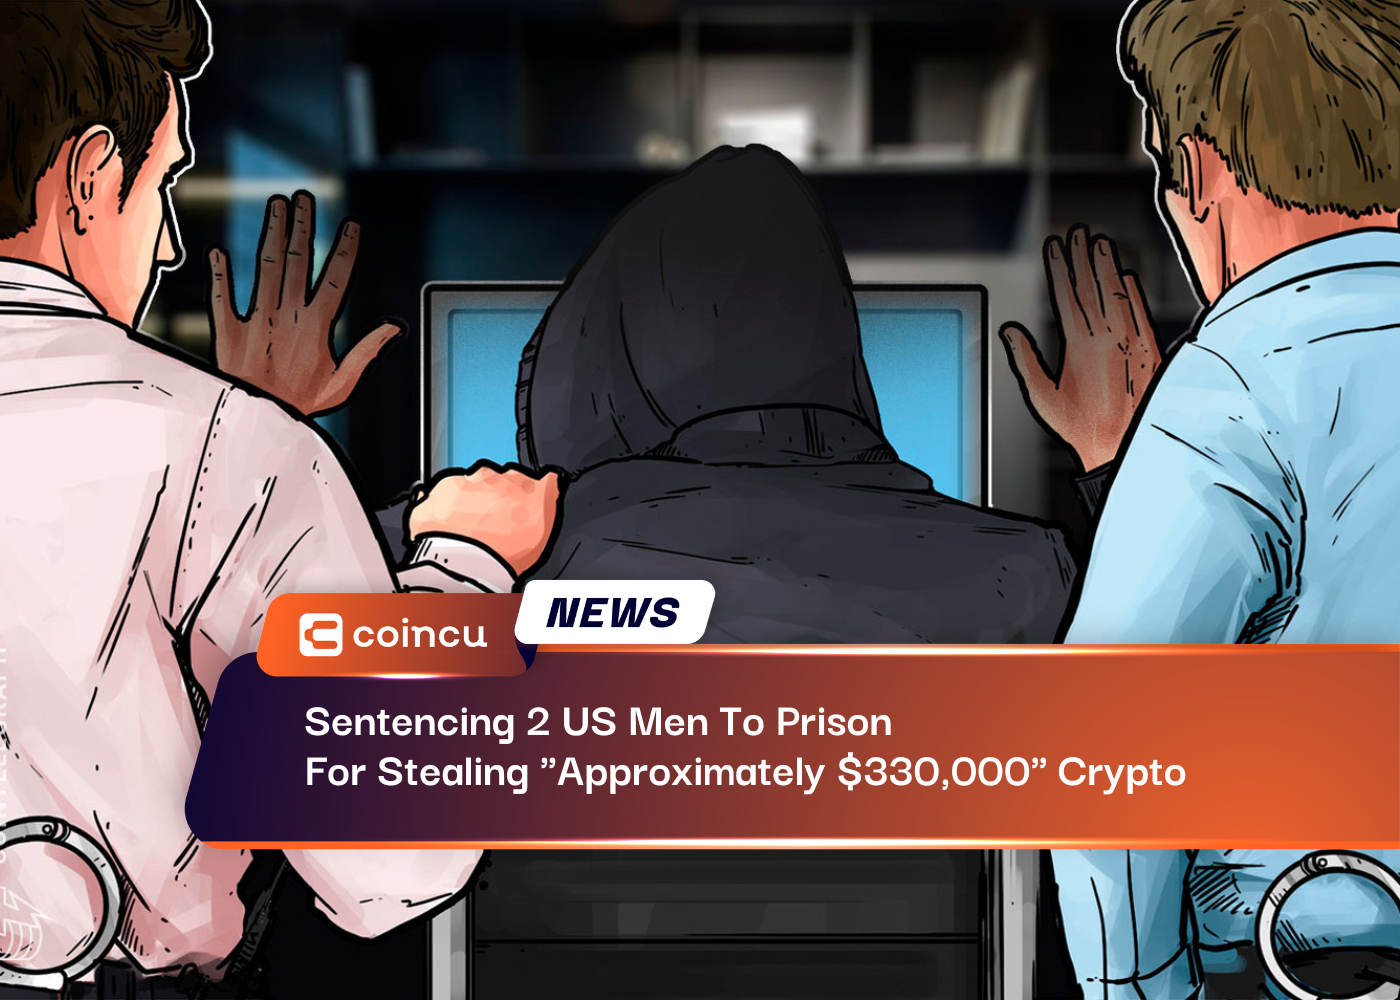 Sentencing 2 US Men To Prison For Stealing "Approximately $330,000" Crypto